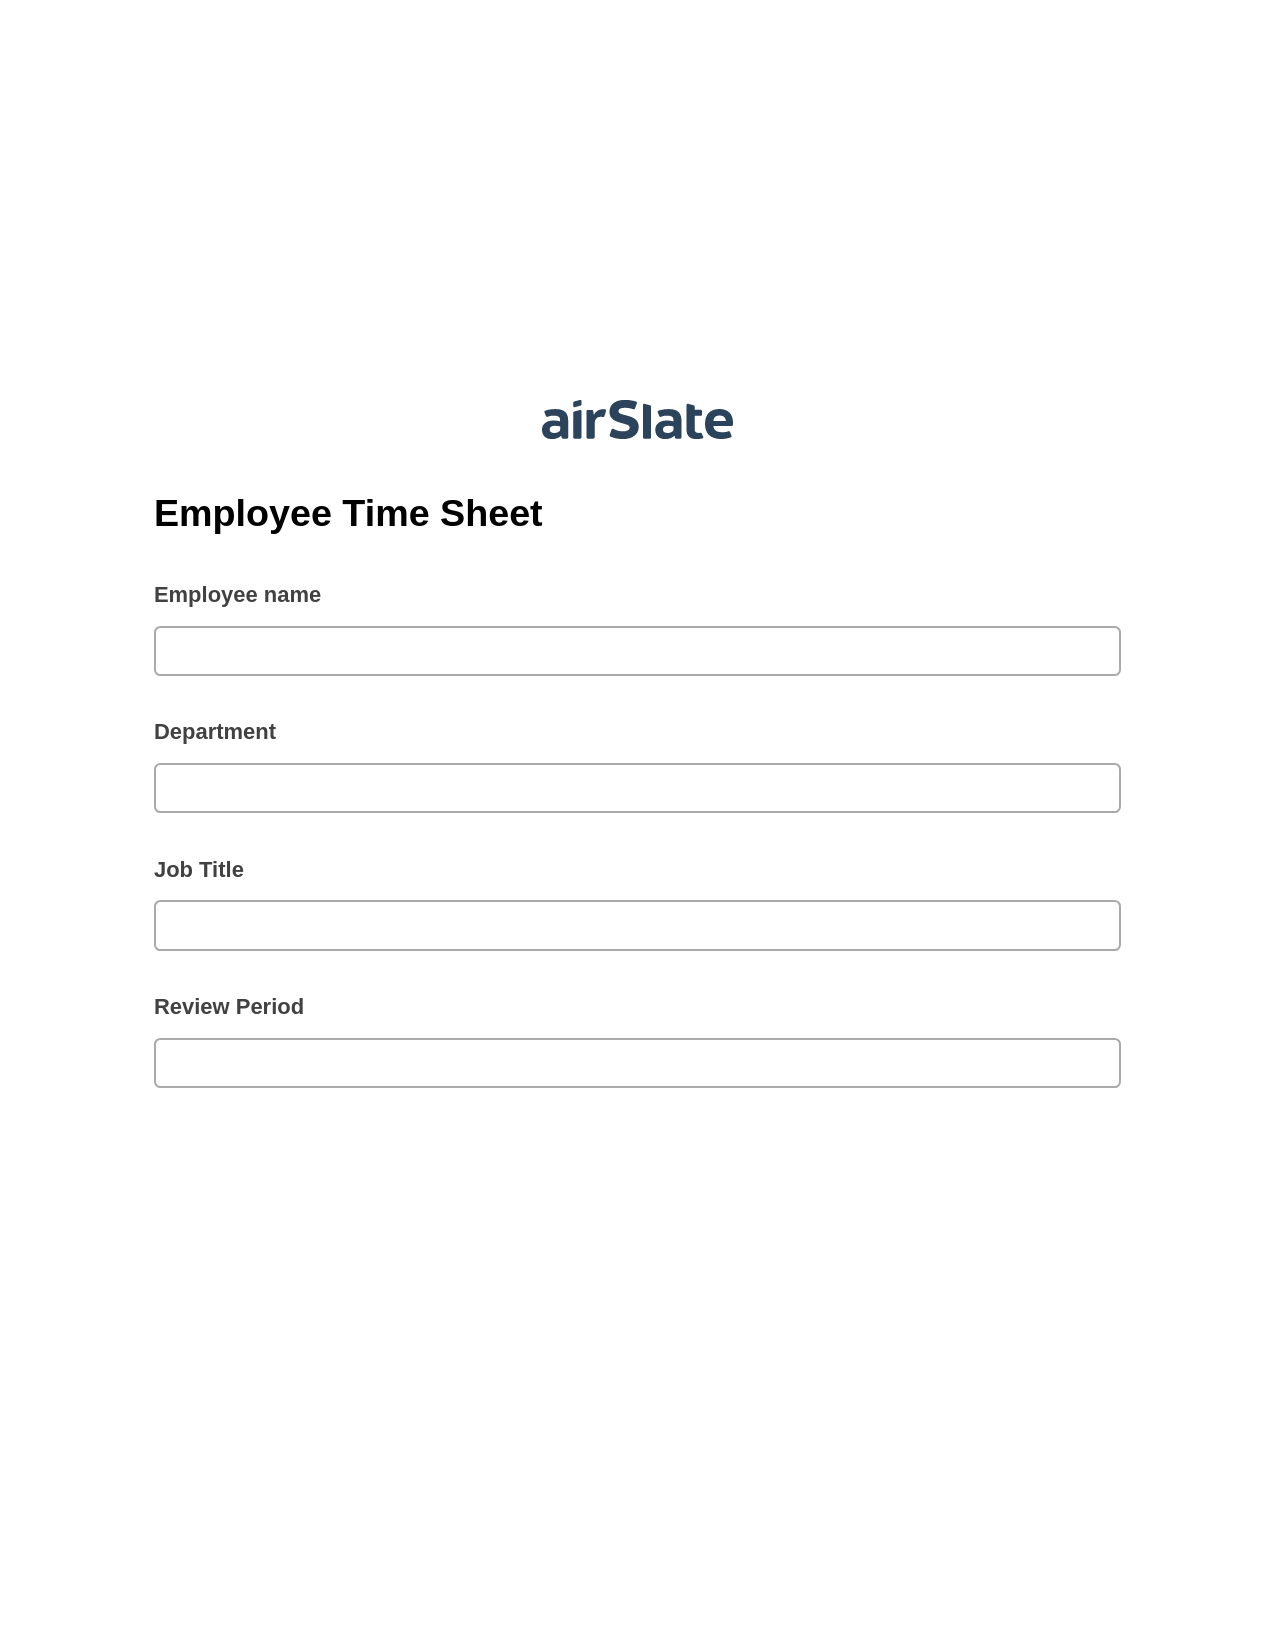 Employee Time Sheet Pre-fill Document Bot, Update Audit Trail Bot, Archive to Google Drive Bot